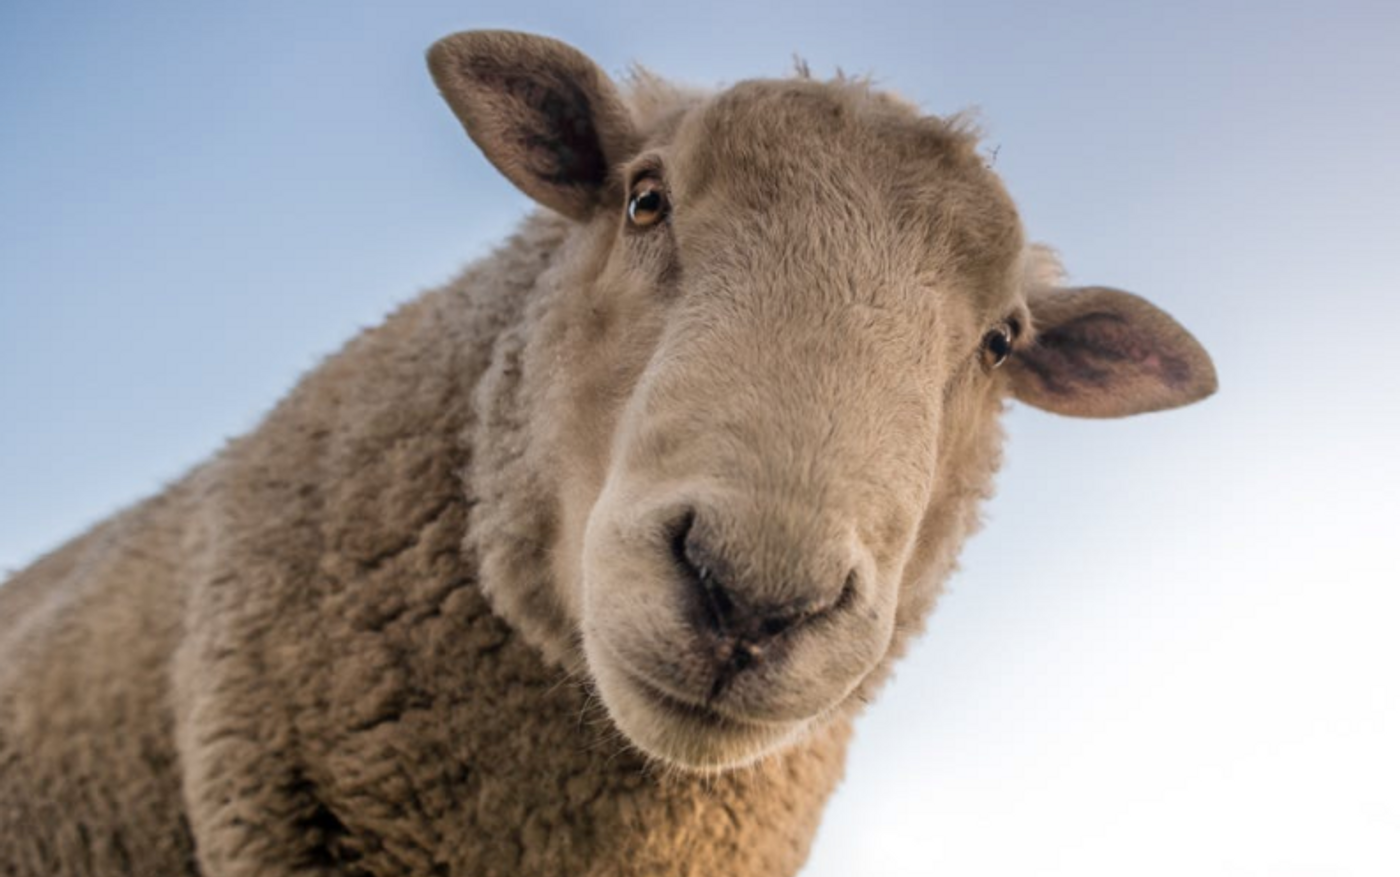 Sheep could act as a kind of incubator for human organs one day. / Image credit: Pexels